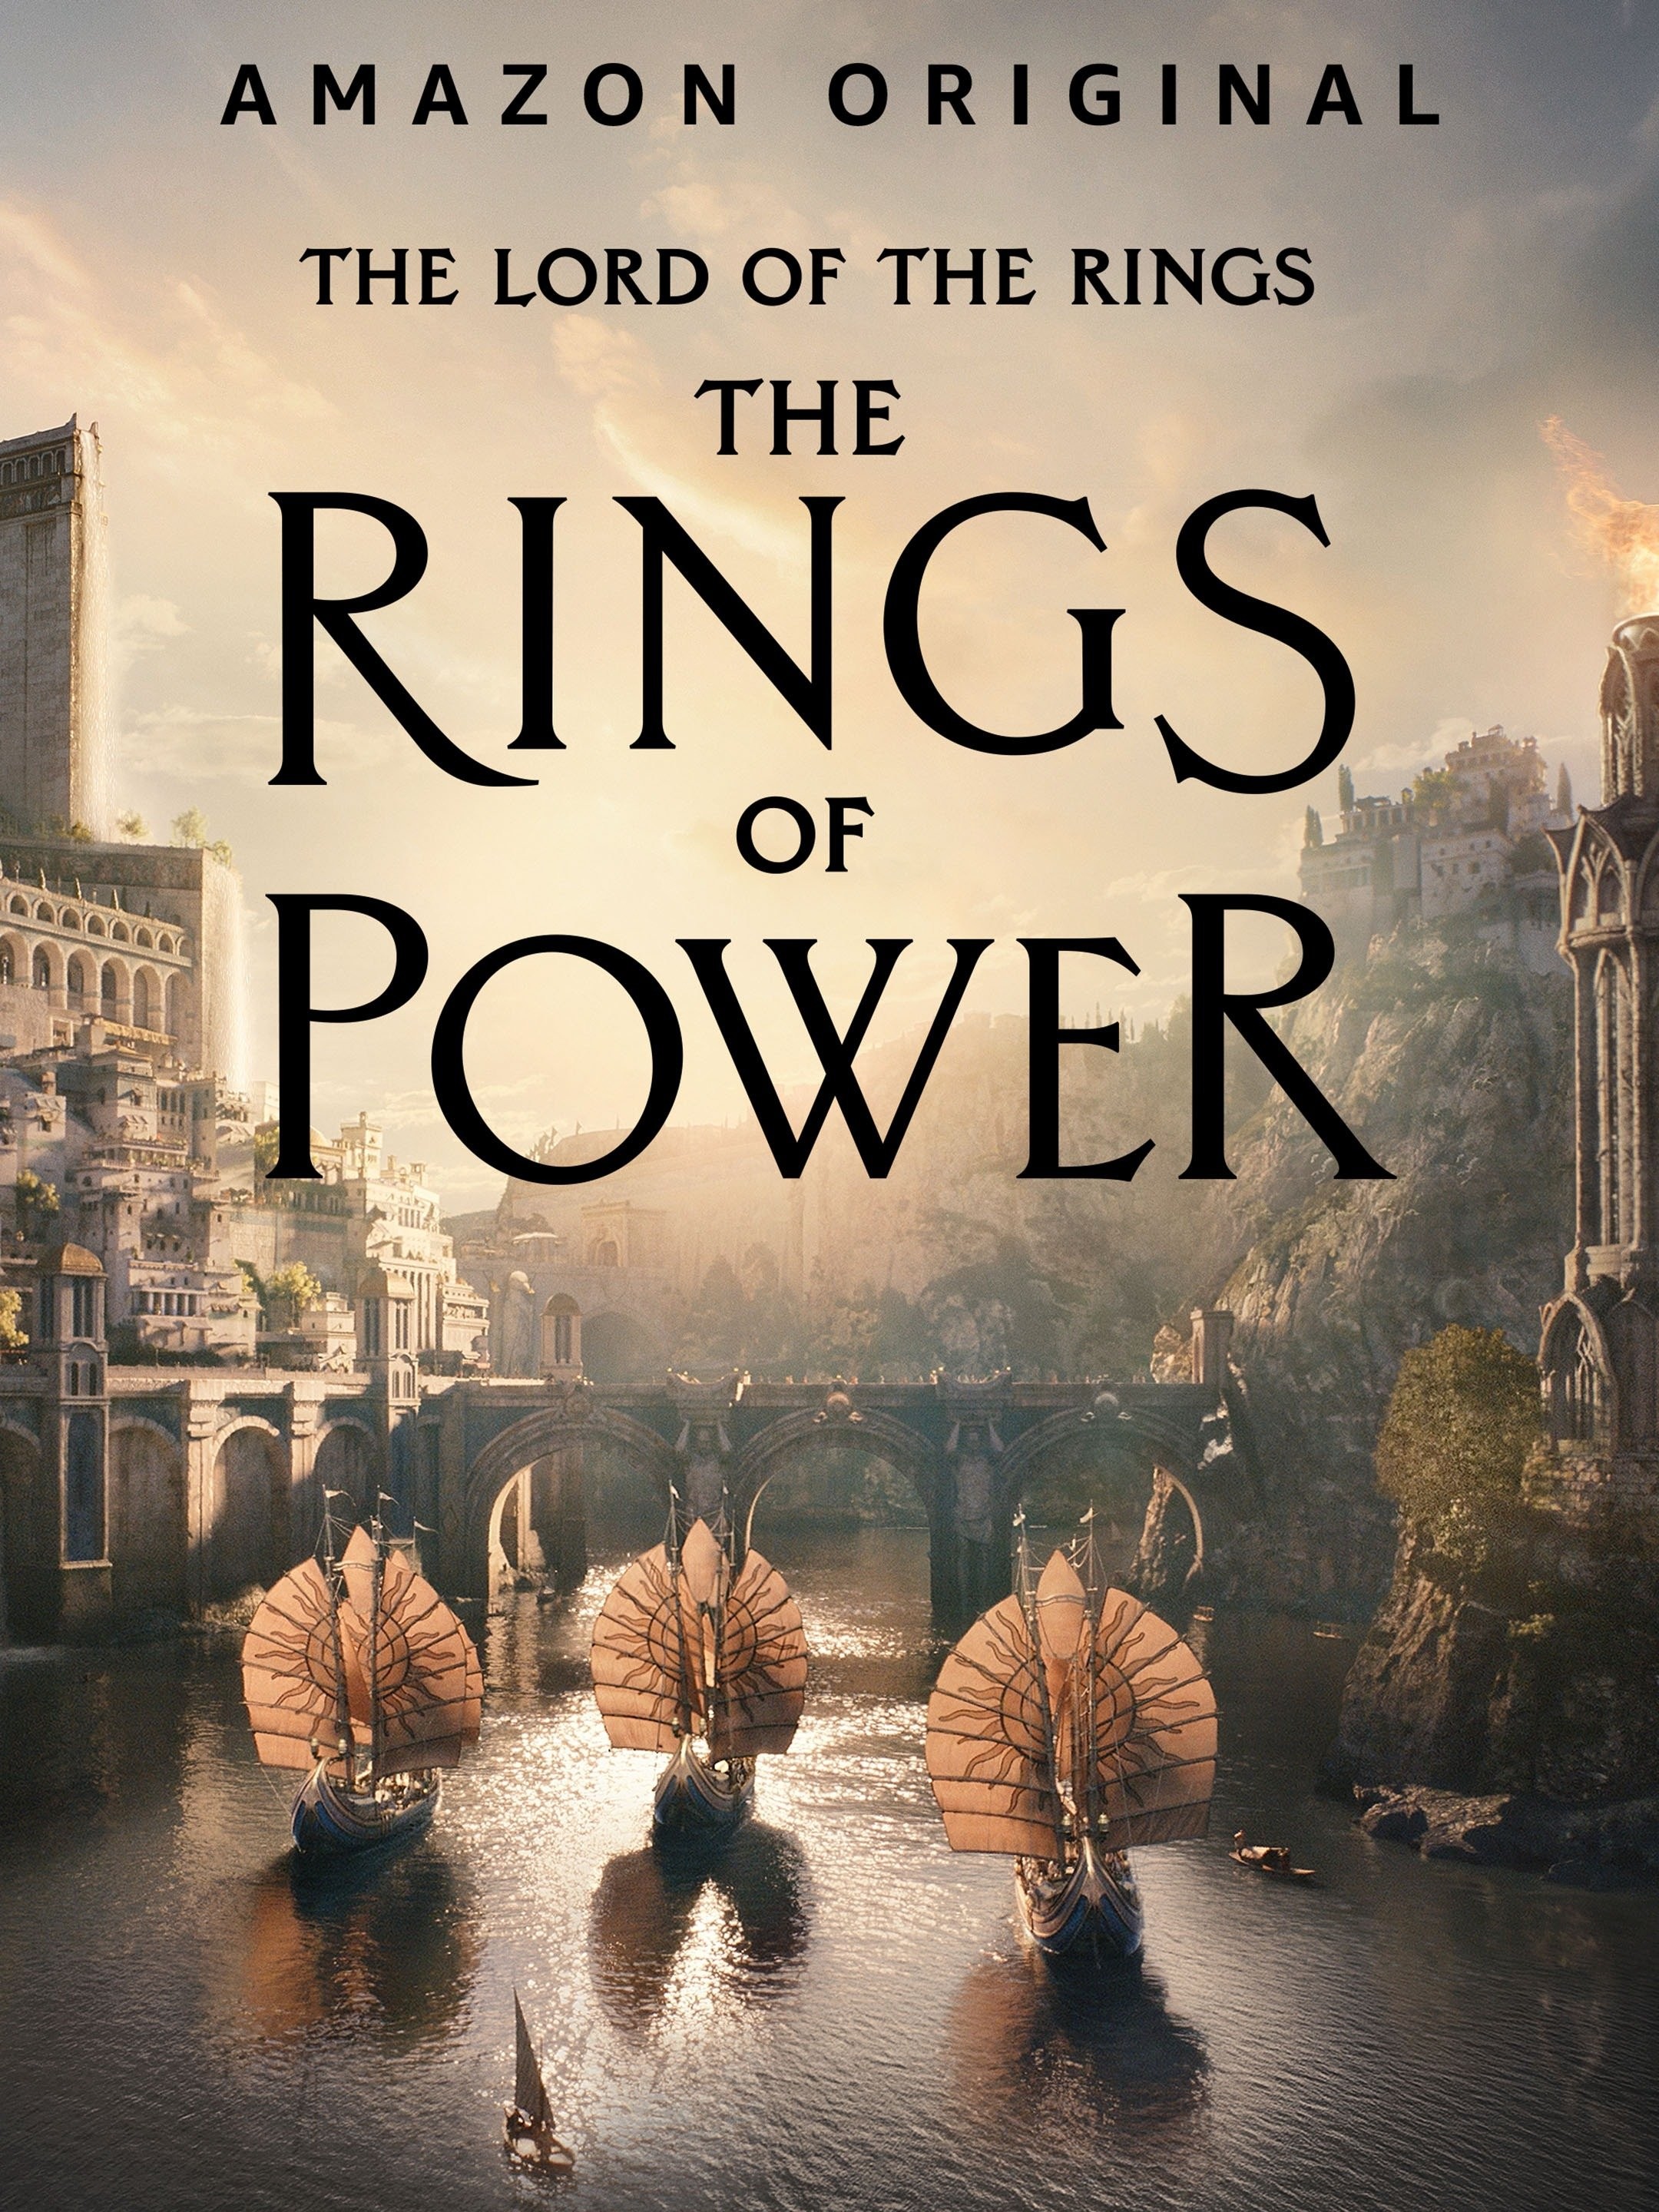 The Lord of the Rings: The Rings of Power: Season 1 | Rotten Tomatoes